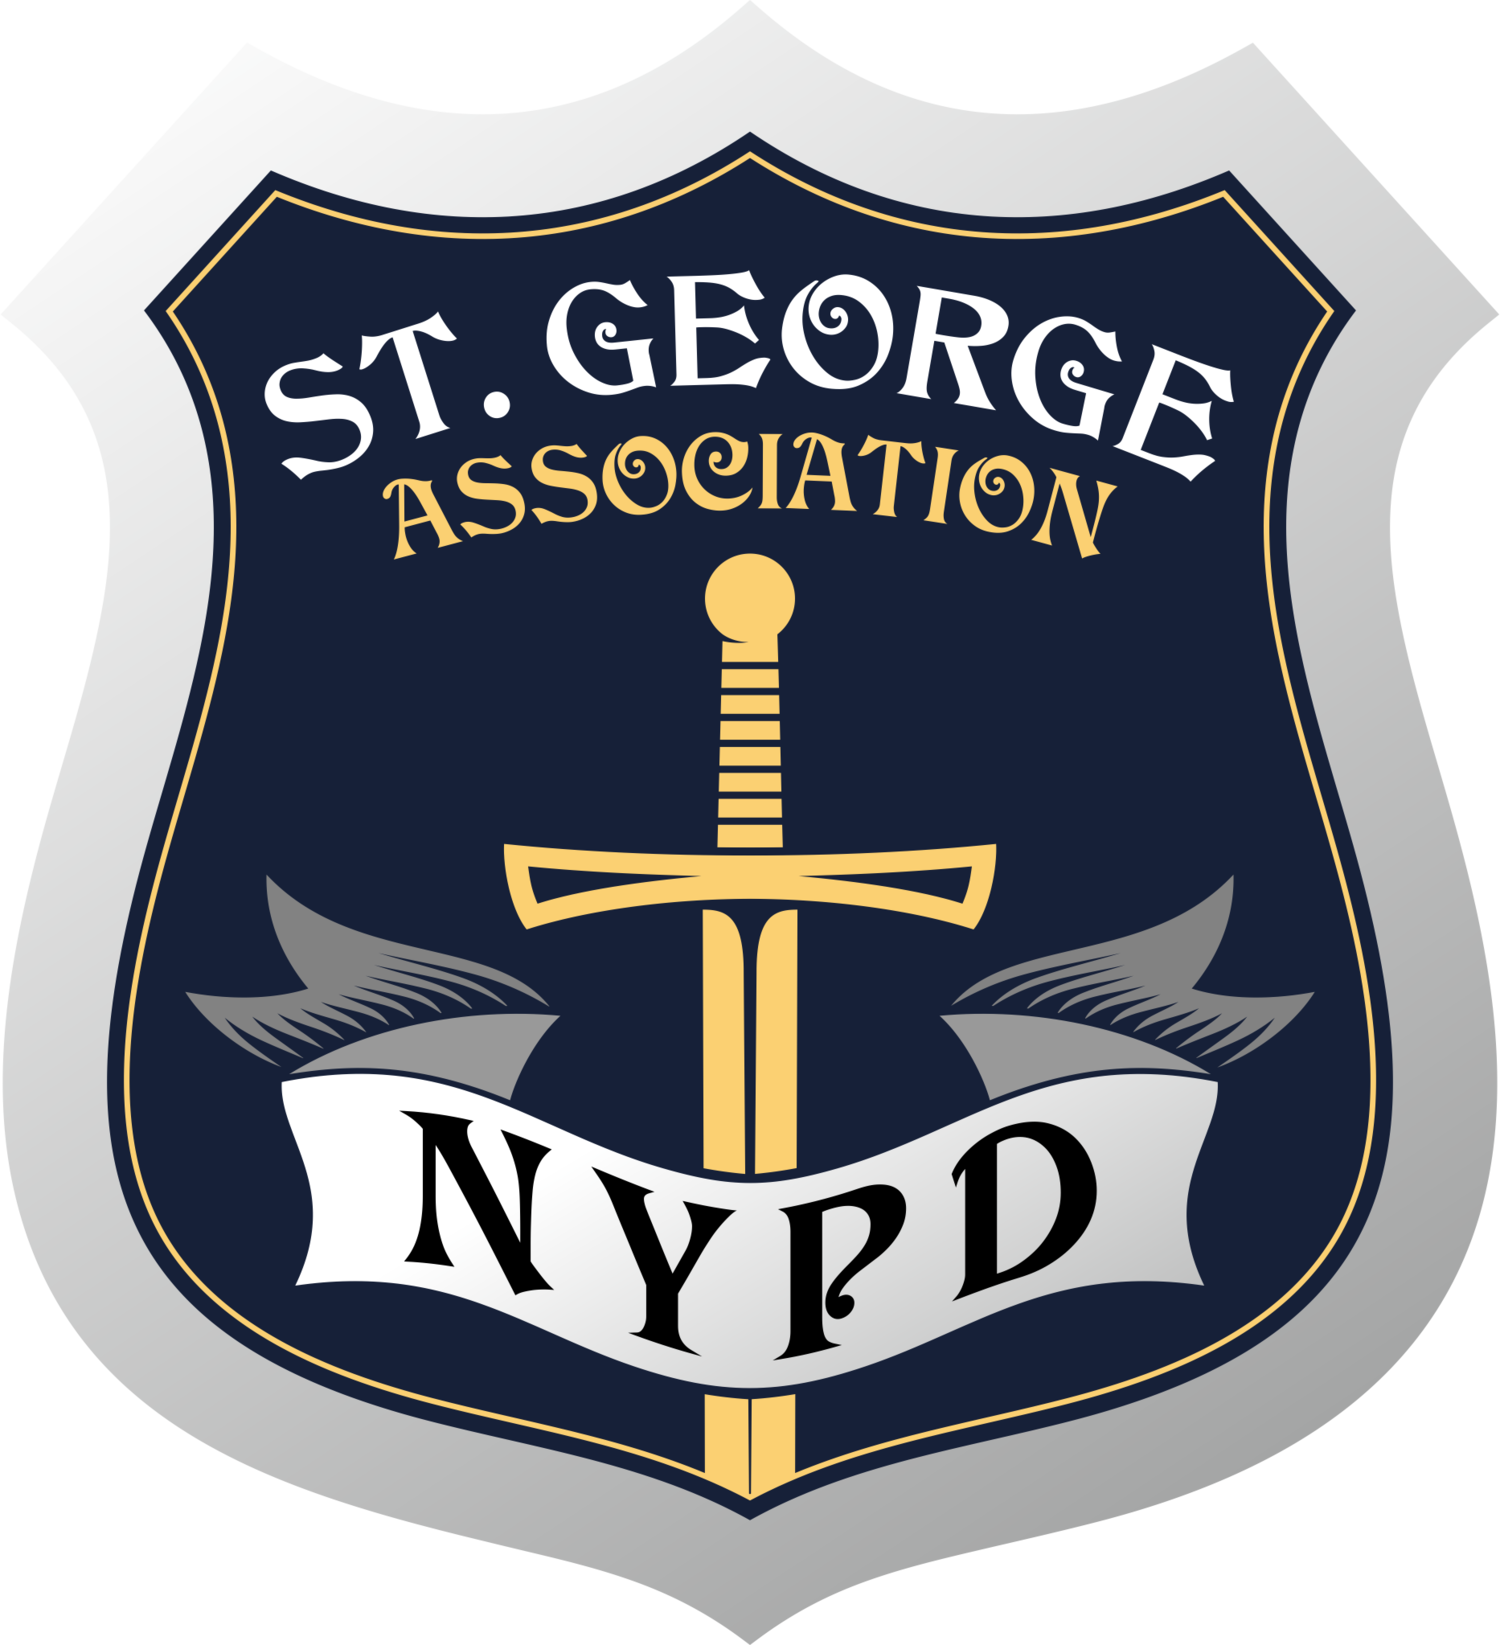 NYPD St. George Association